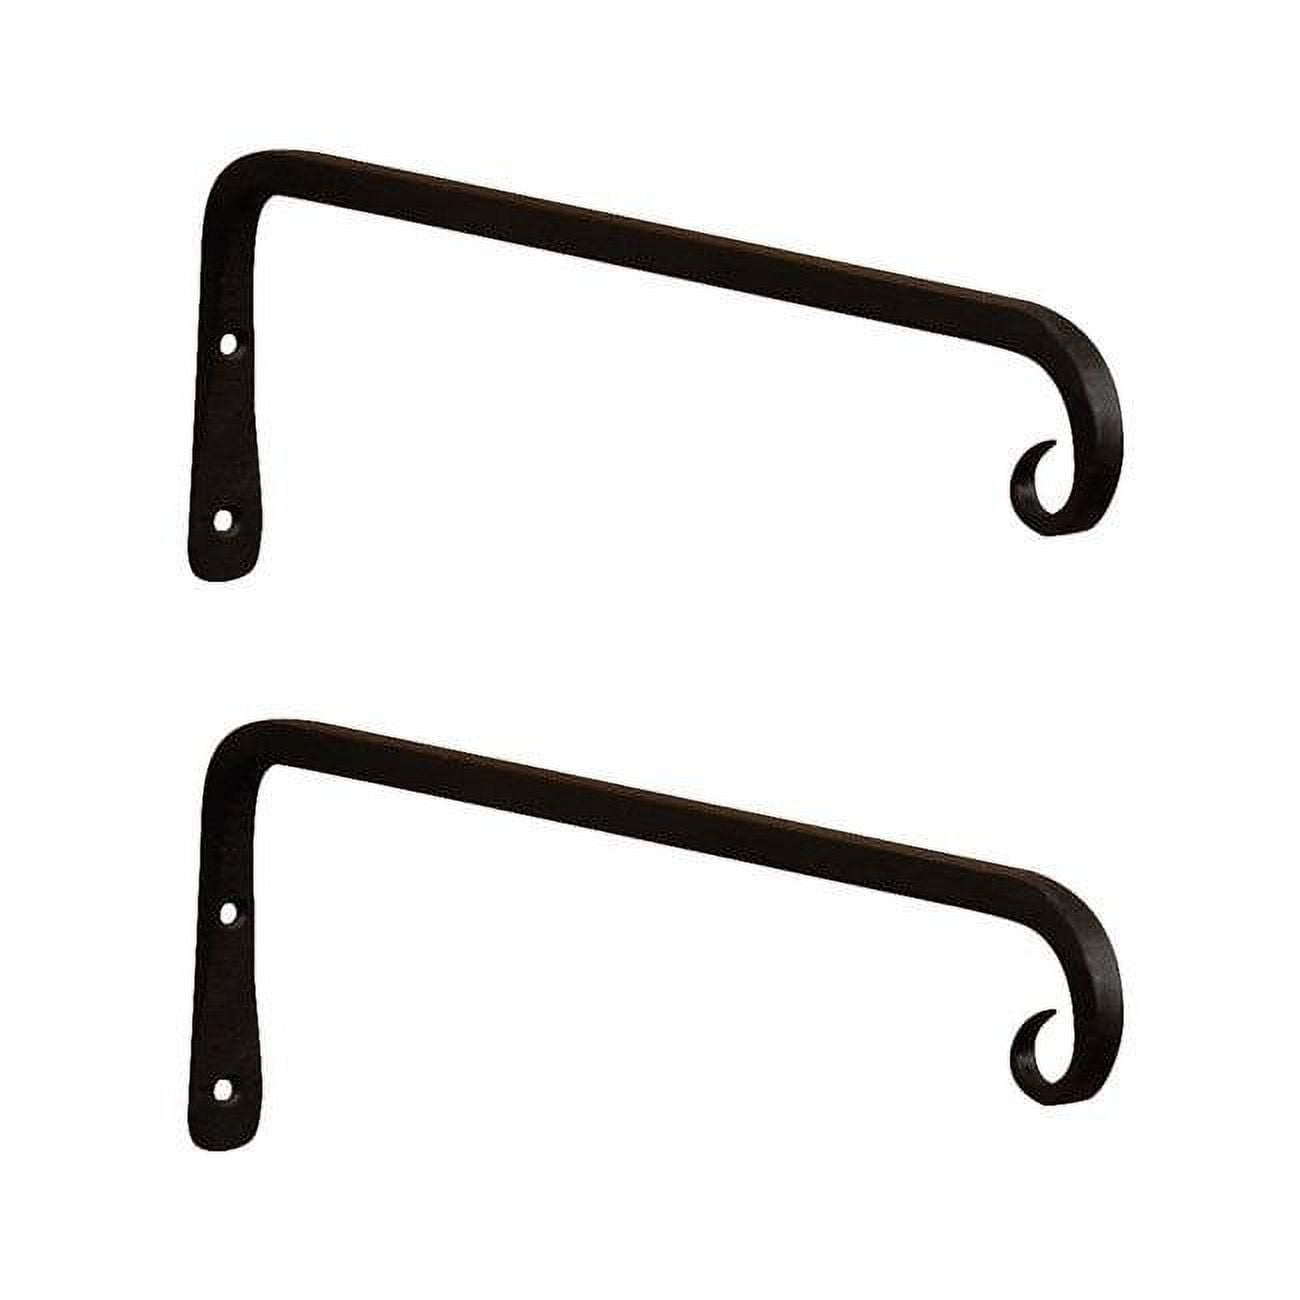 Picture of ACHLA Designs TSH-12-2 12 in. Straight Downcurled Bracket, Black - Pack of 2